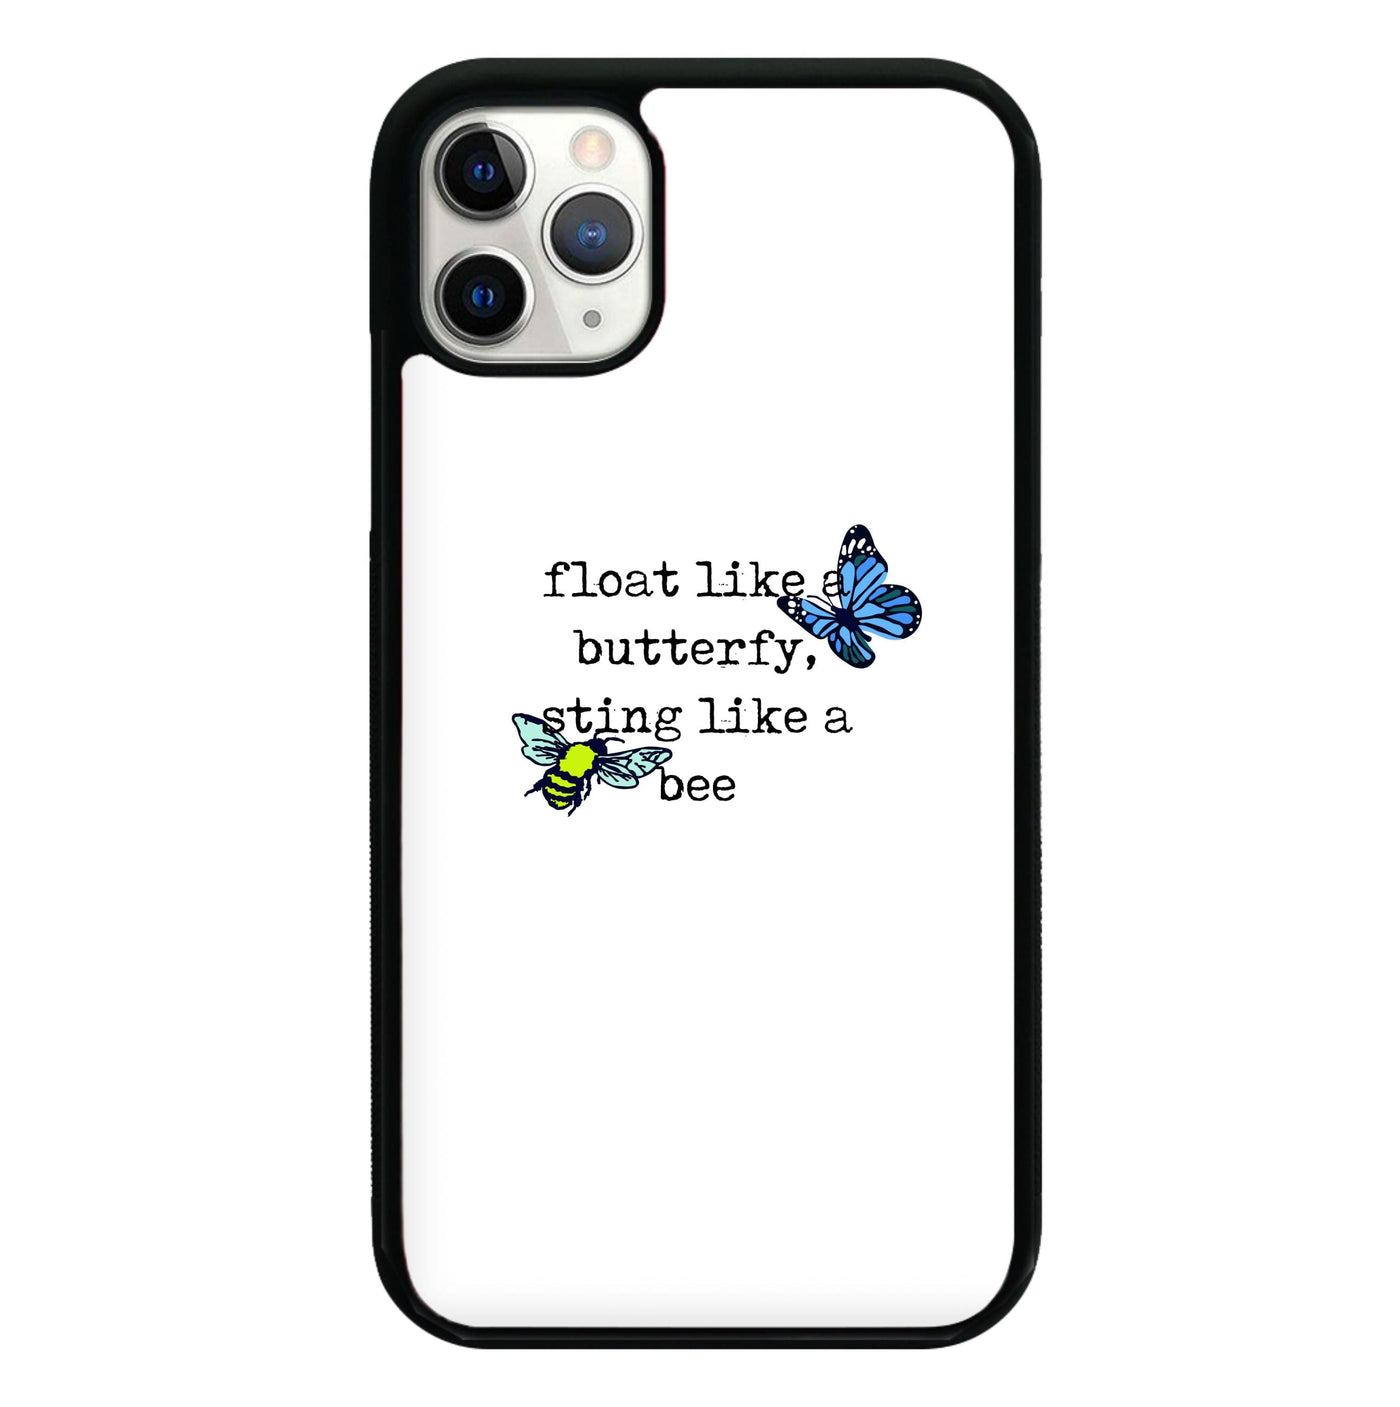 Float like a butterfly, sting like a bee - Boxing Phone Case